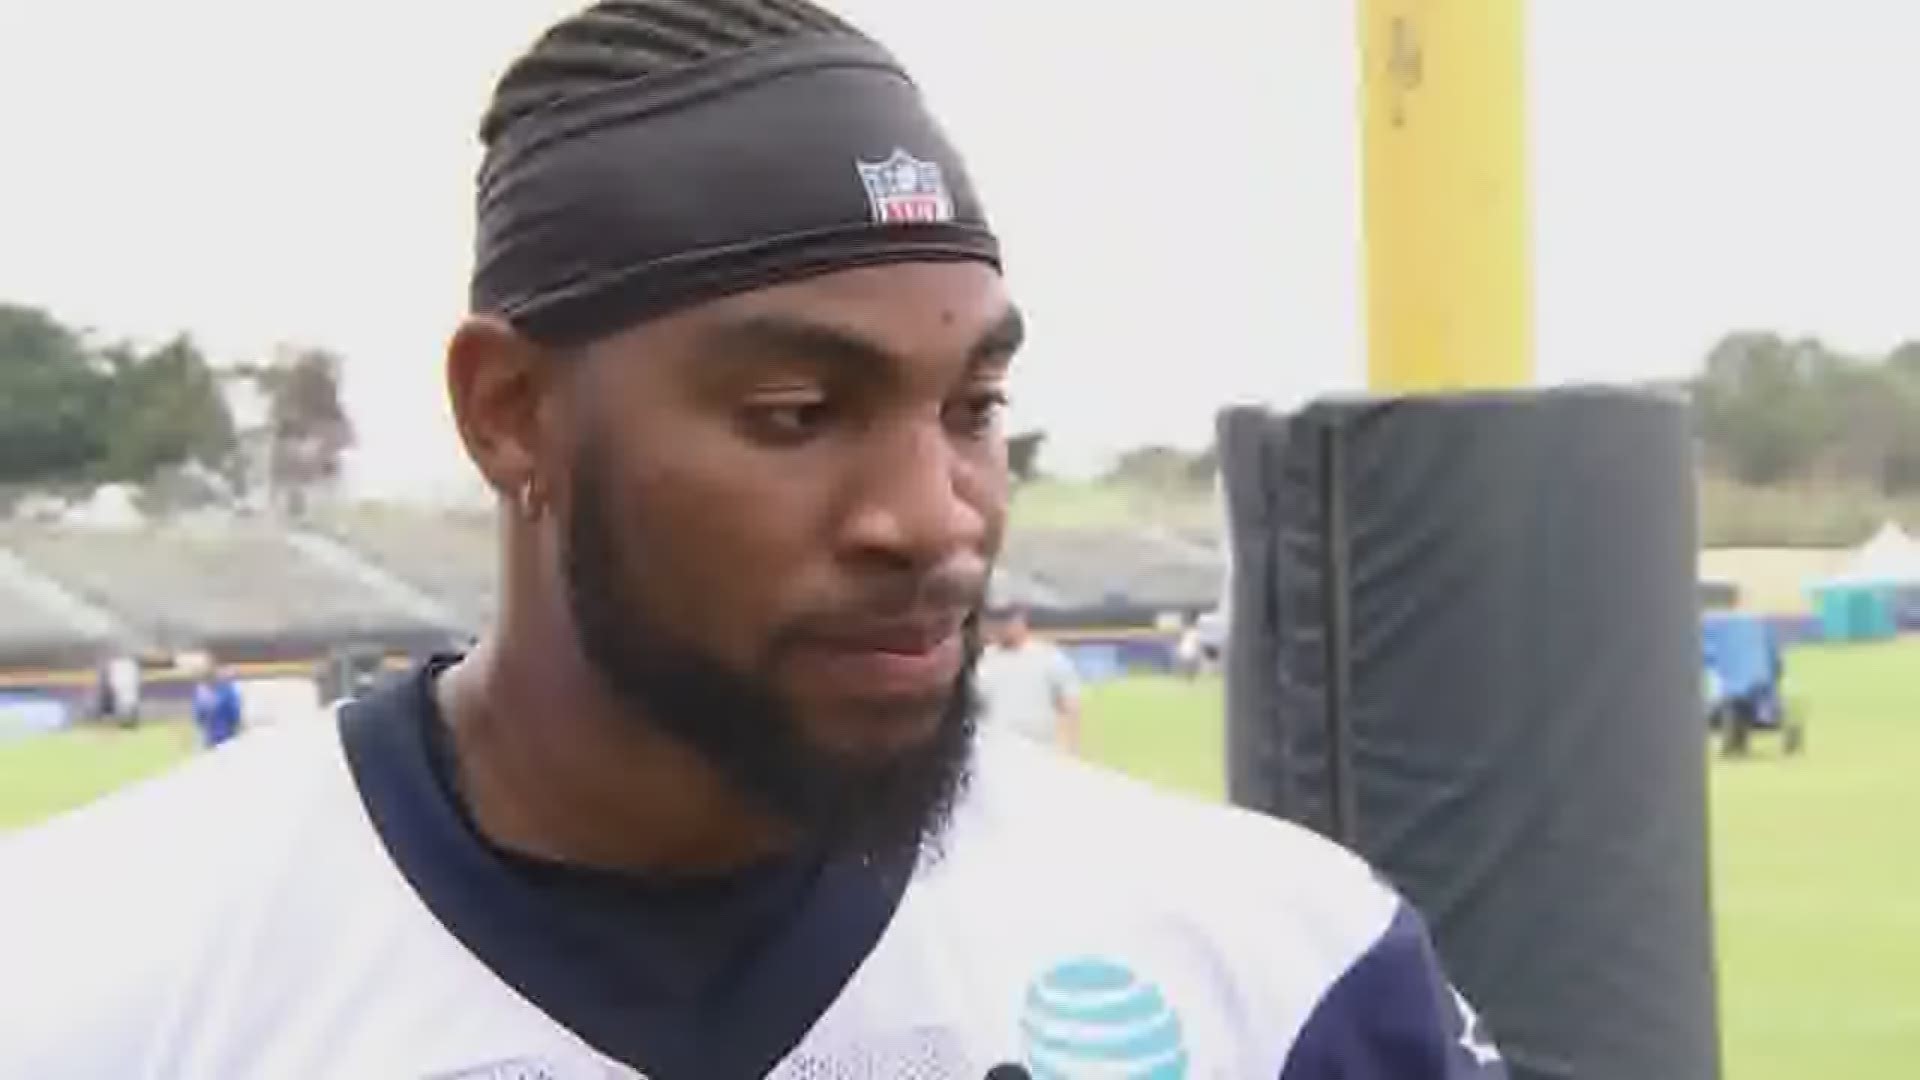 Rico Gathers, the former Baylor basketball player Cowboys legend Michael Irvin once called "Zeus," is back on the practice field.